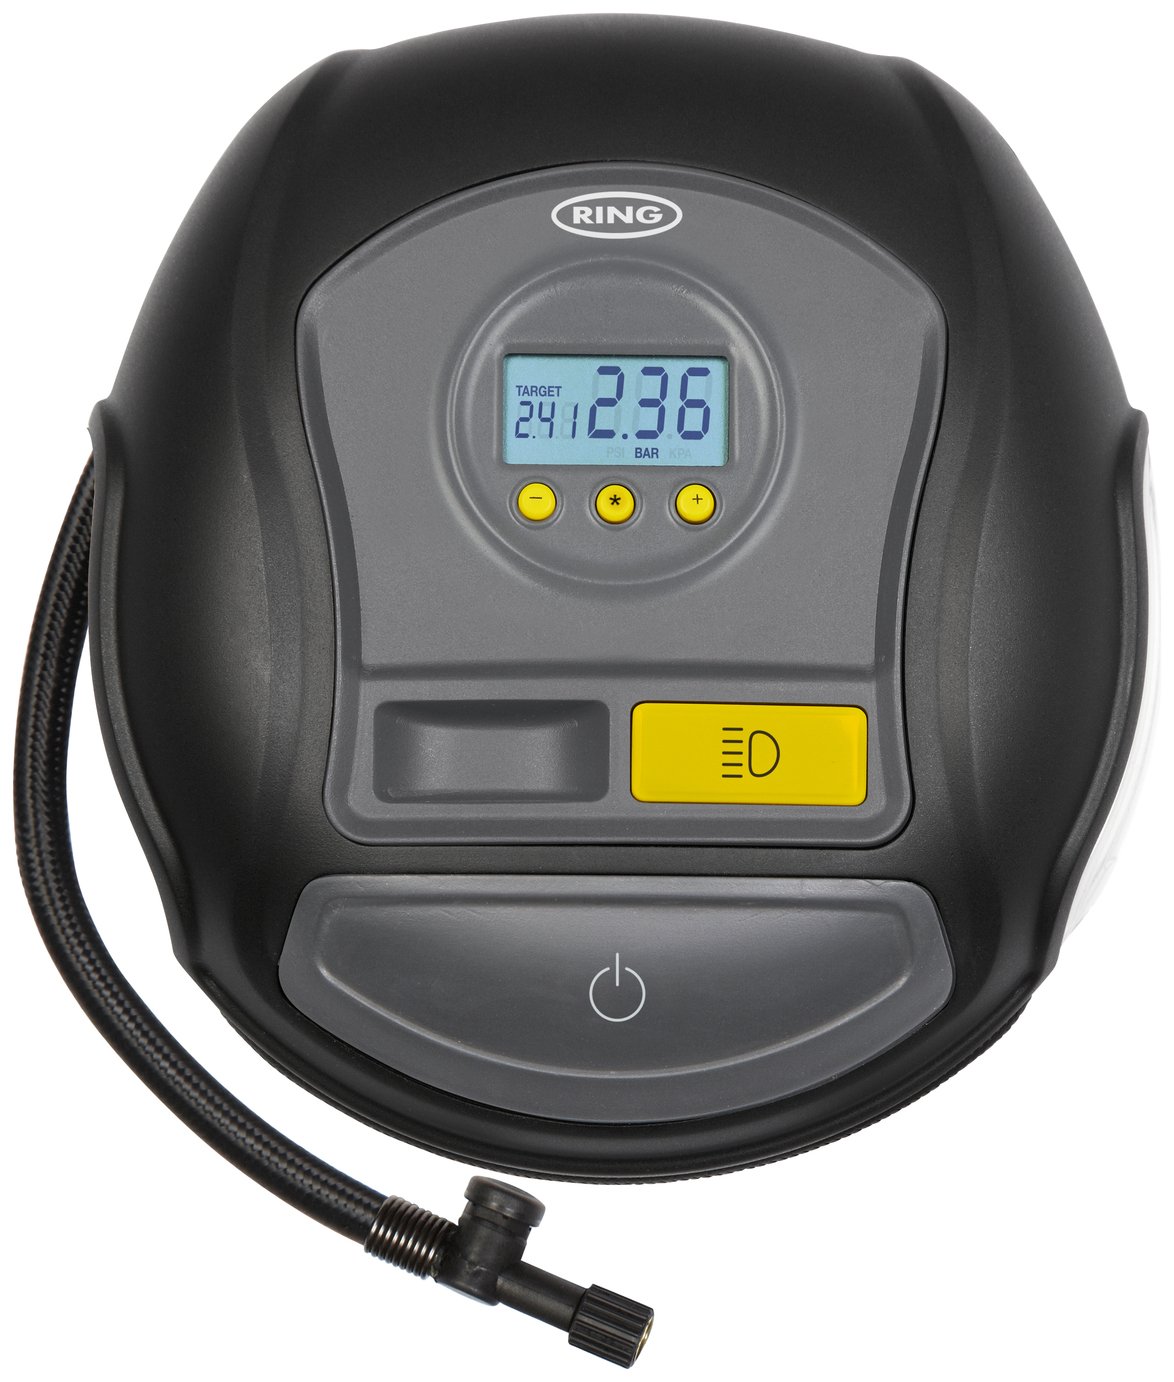 Ring RTC600 Digital Tyre Inflator with Autostop review